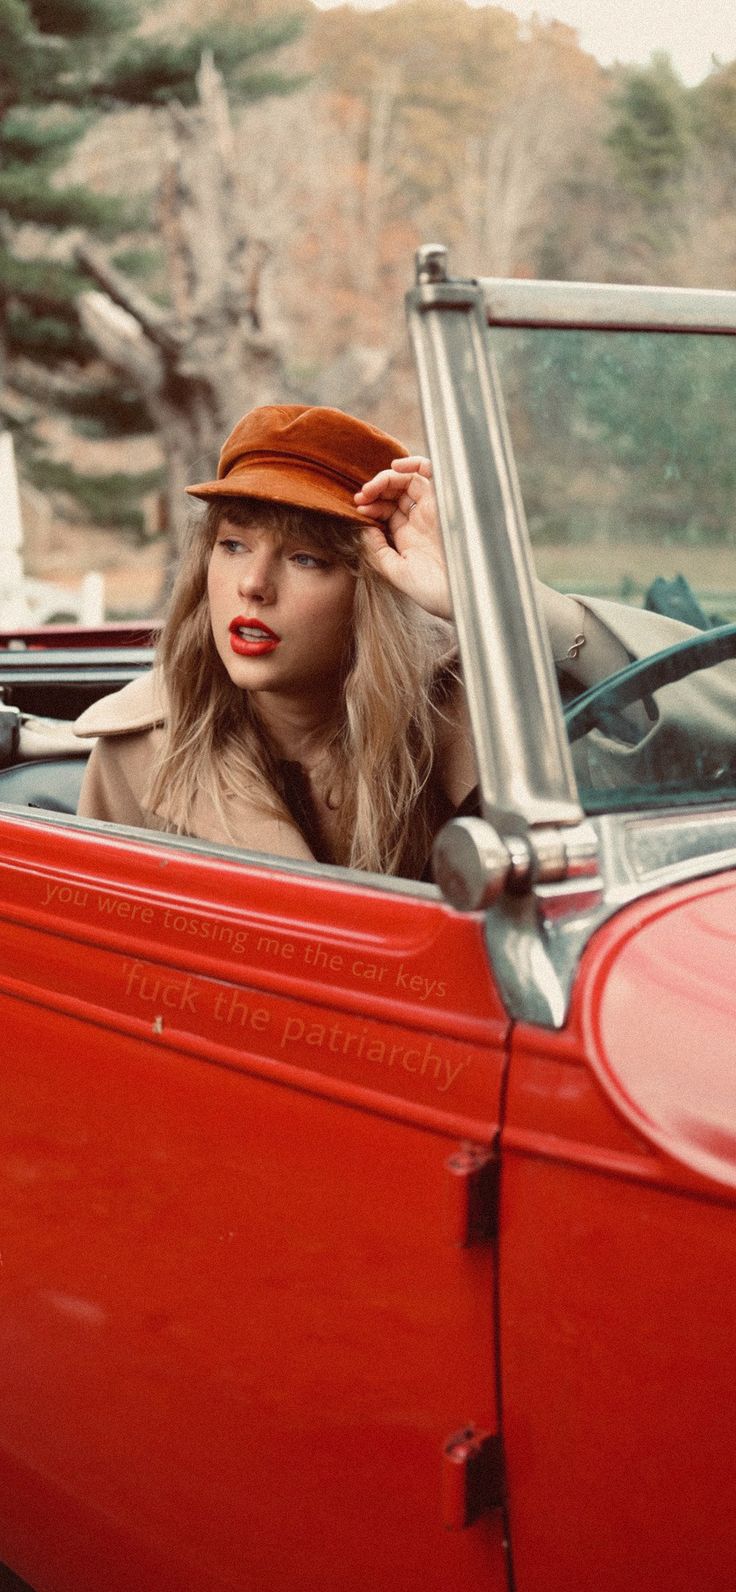 Taylor Swift Red Wallpapers